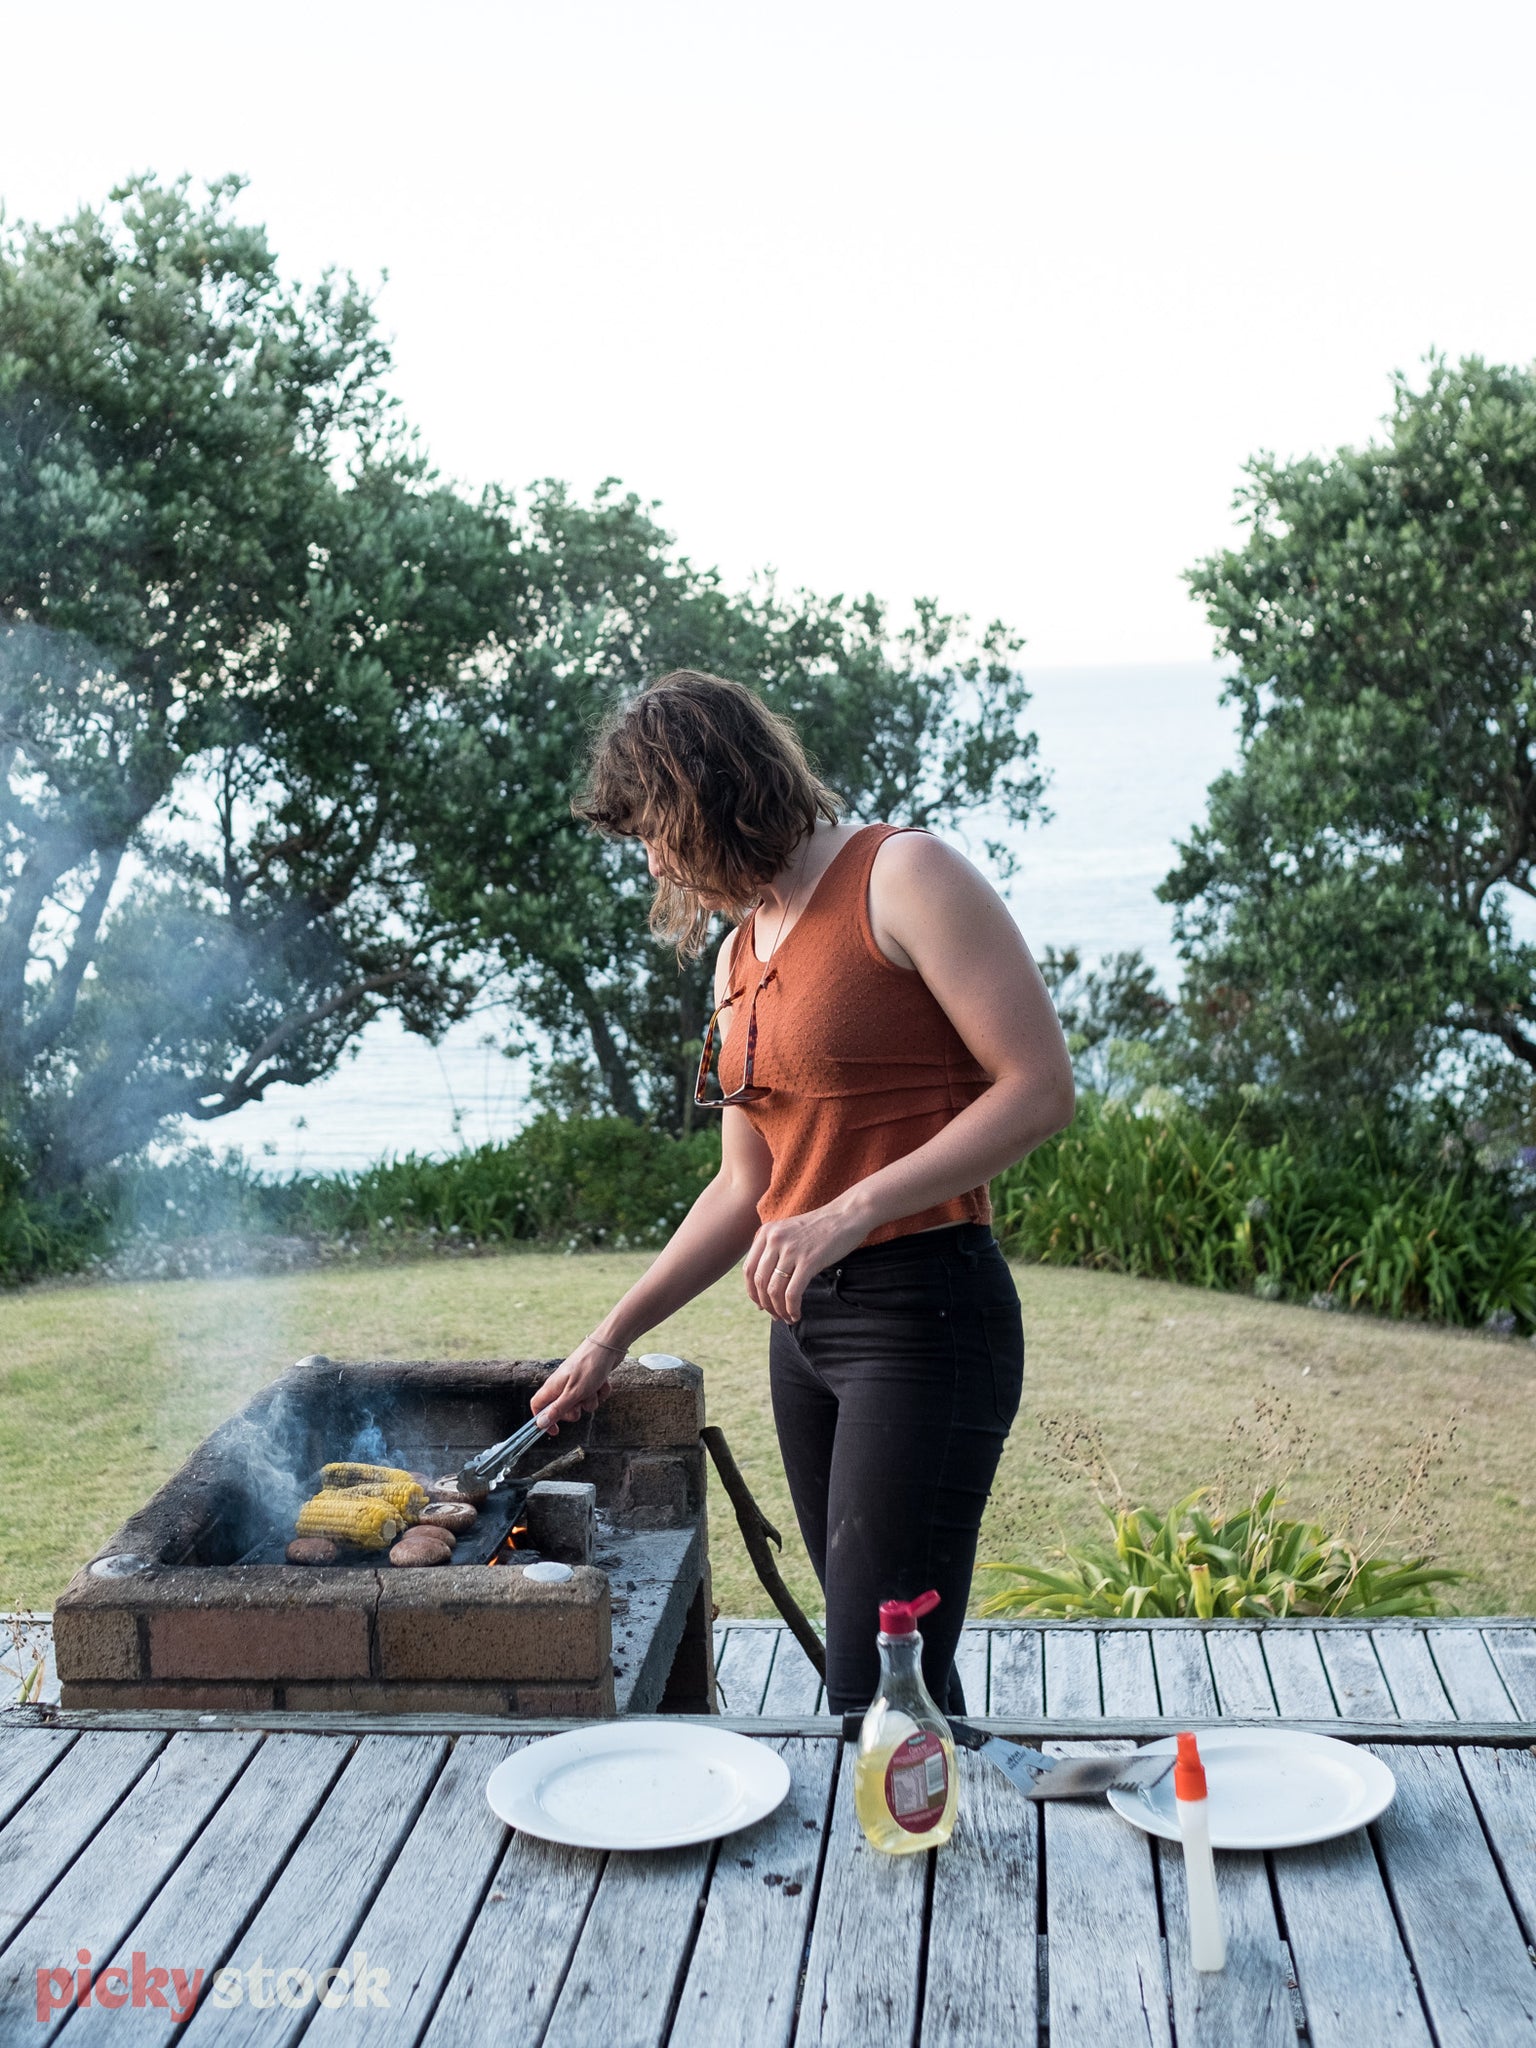 Red head lady in early twenties cooks on old charcoal BBQ, getting it heated and ready for cooking. She wears a burnt umbre coloured singlet and her hair is semi-wet. 